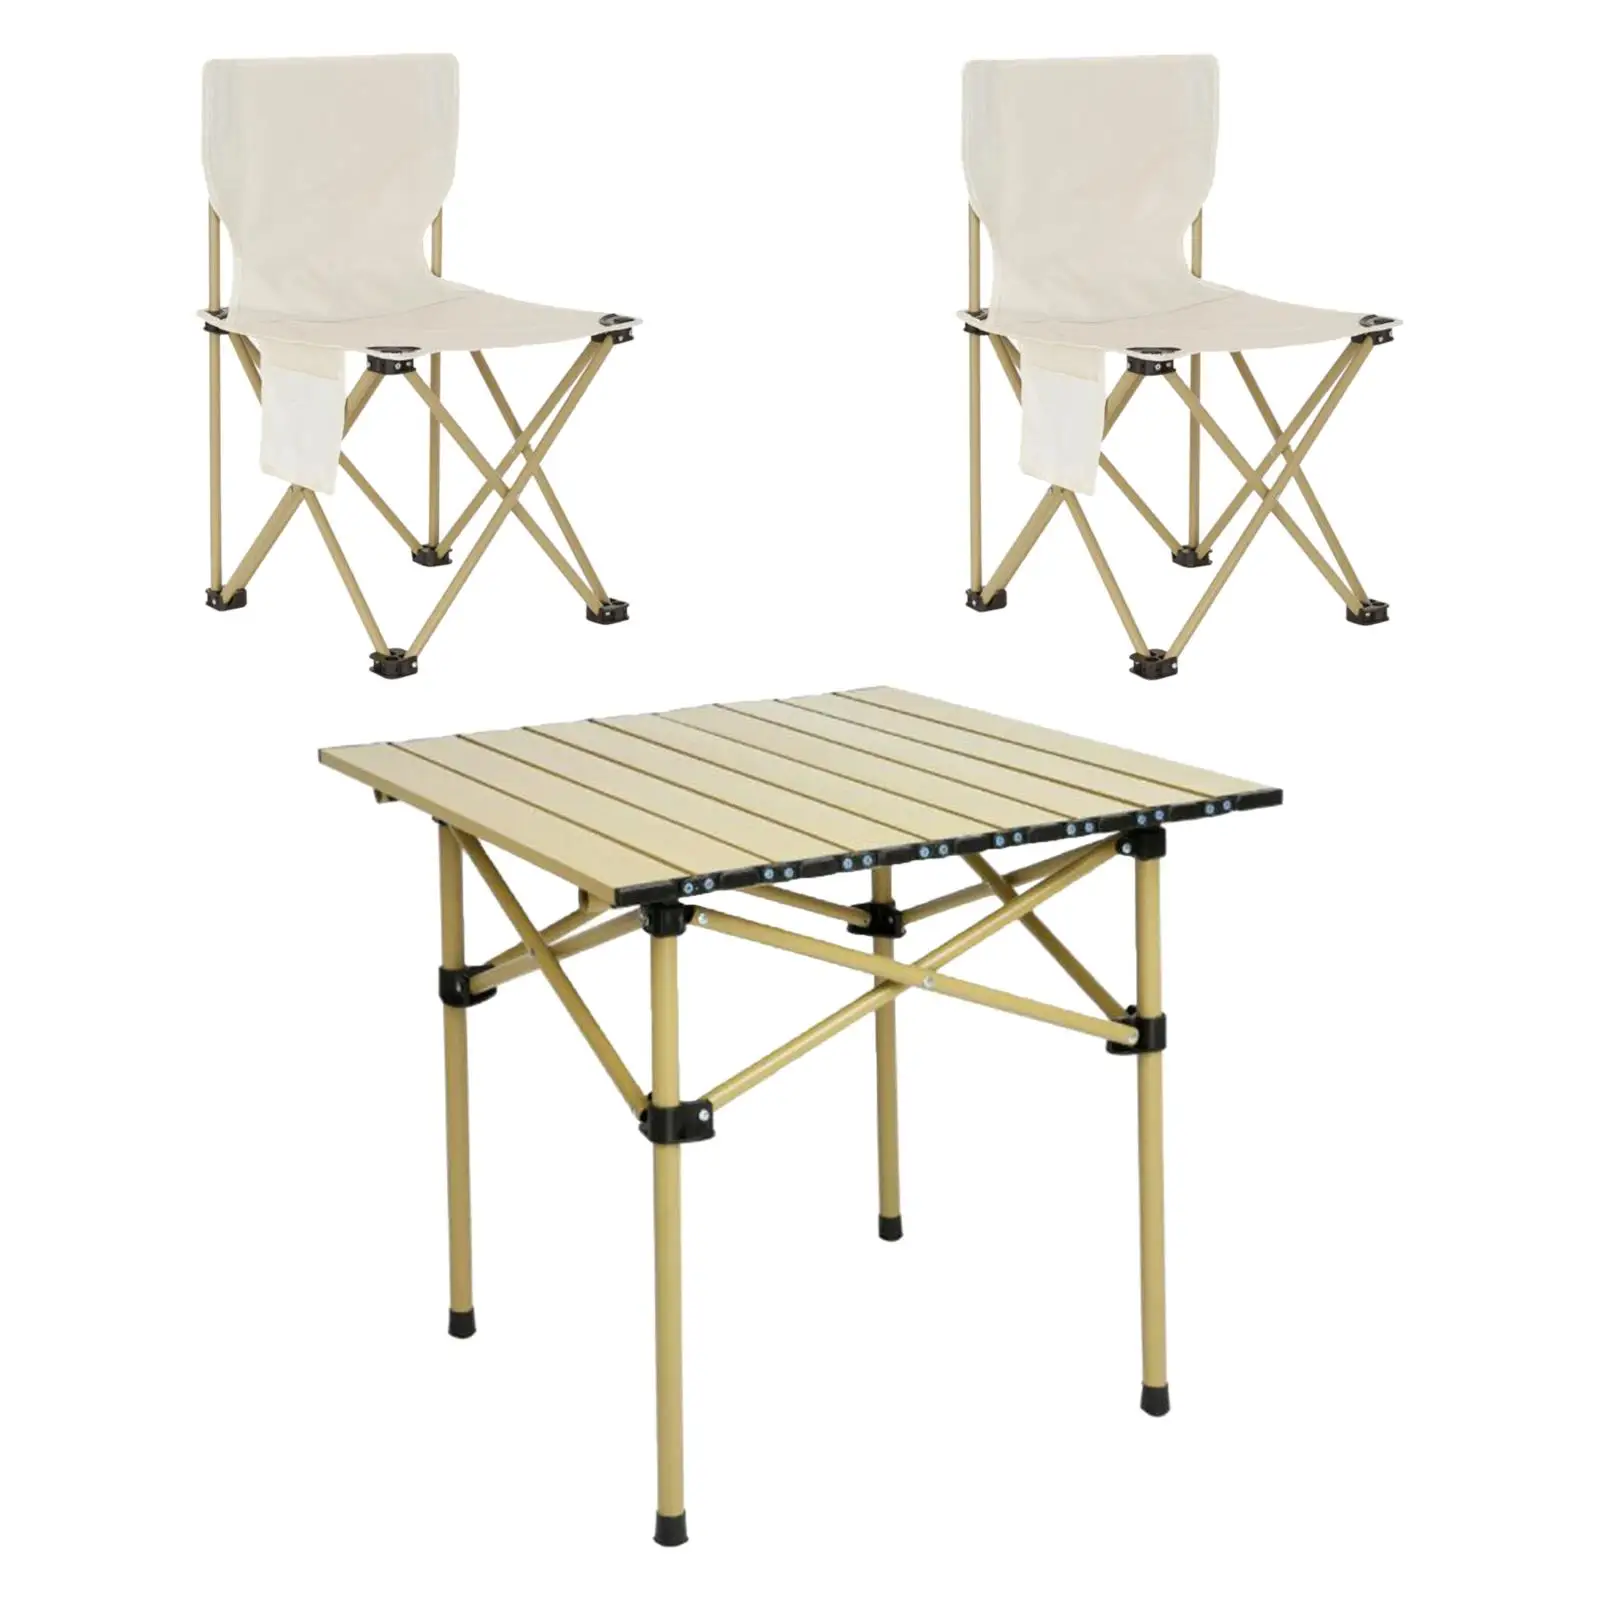 Camping Folding Table Chairs Set Oxford Mat Chair Camp Table Beach Table Coffee Tables Side Table for Outdoor Backyard Party